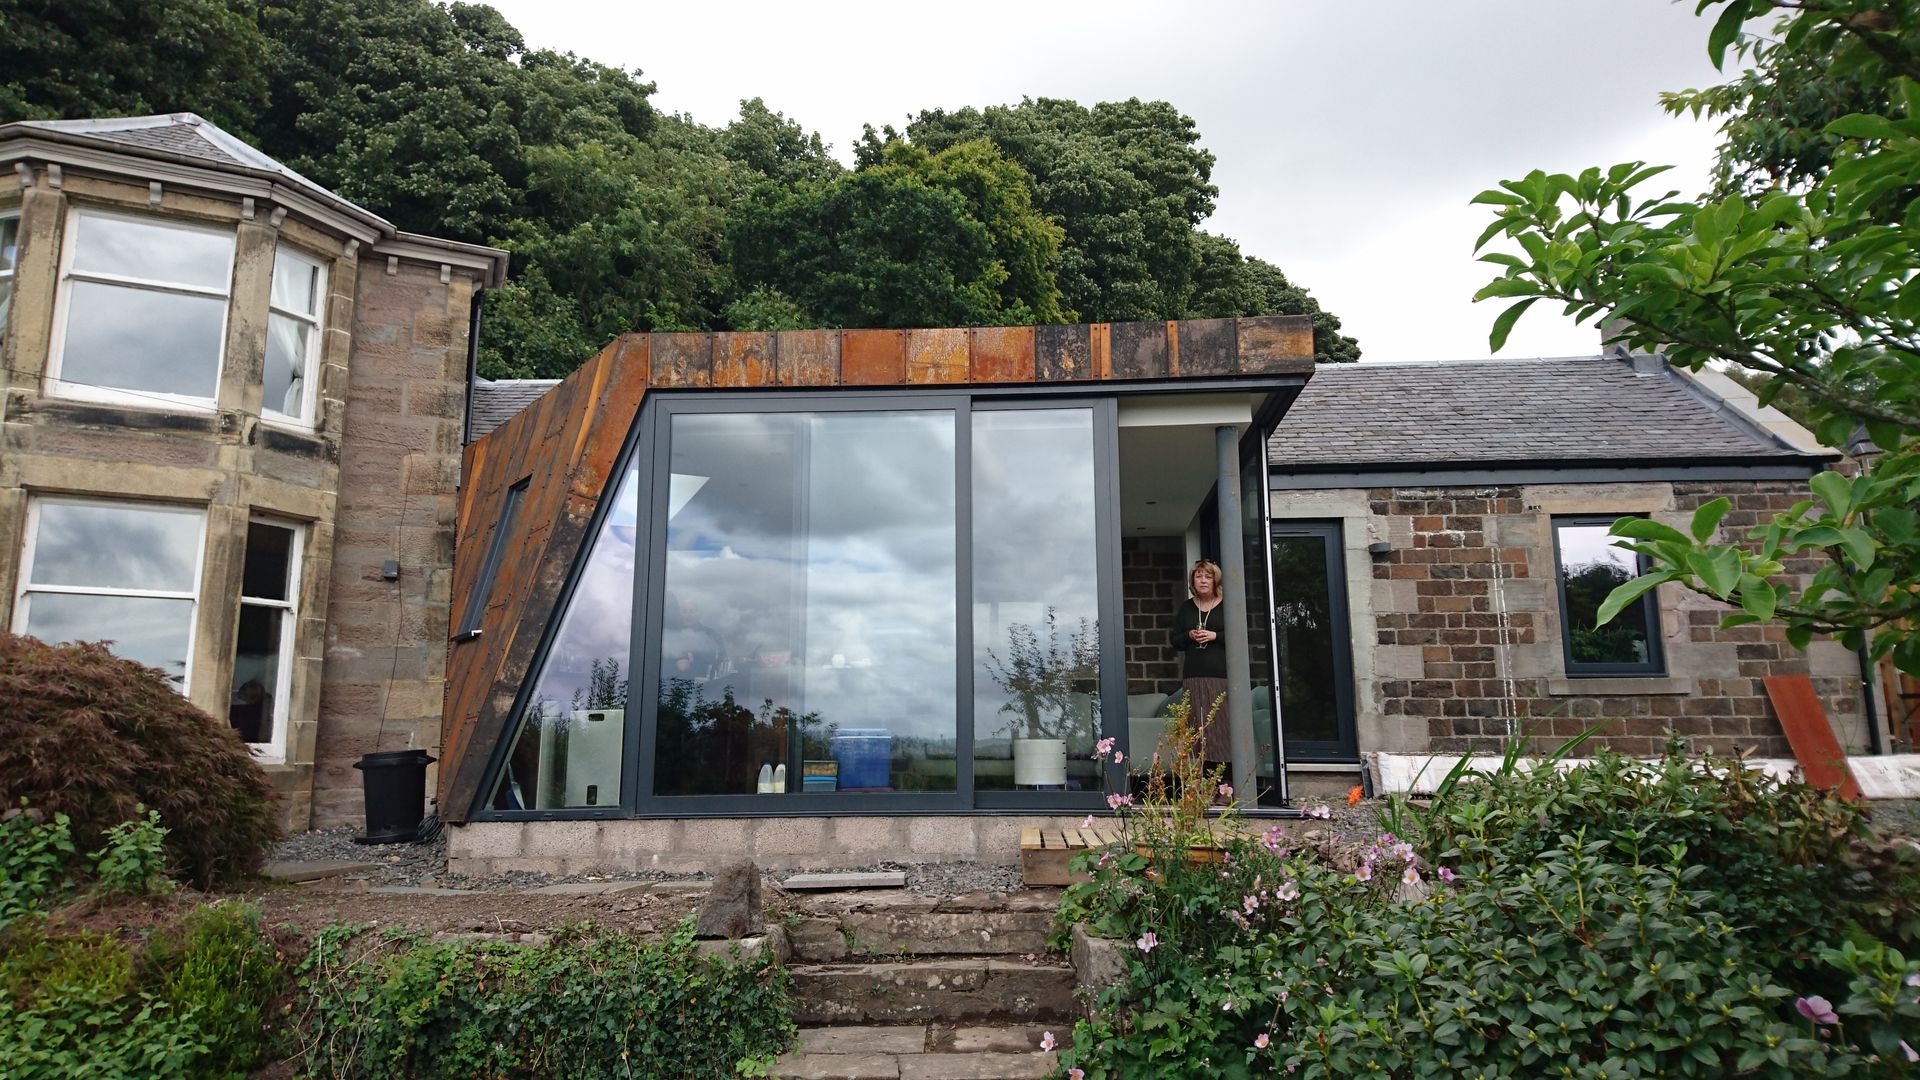 Large sliding doors allow the corner to fold away creating a stronger connection between inside and out. Woodside Parker Kirk Architects Casas estilo moderno: ideas, arquitectura e imágenes Hierro/Acero Glass sliding doors,Corten steel cladding,extension,old meets new,Garden,Extension